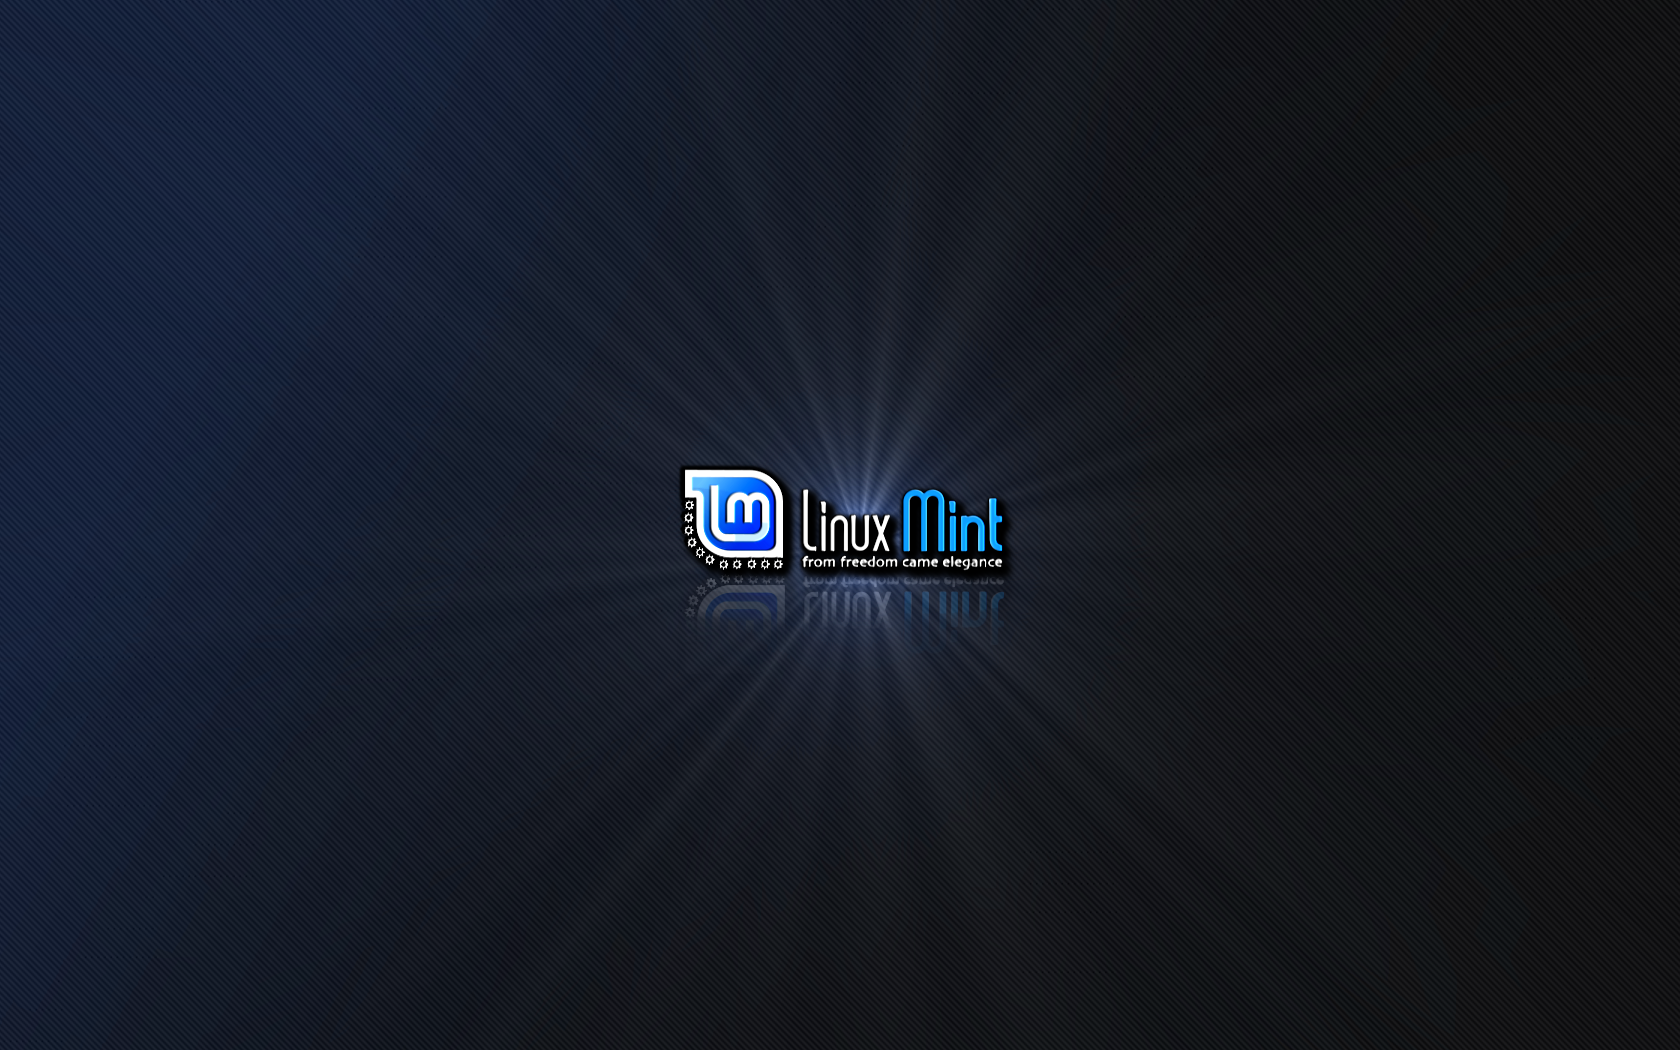 2 New Wallpapers   Classic Mint   Linux Mint Forums